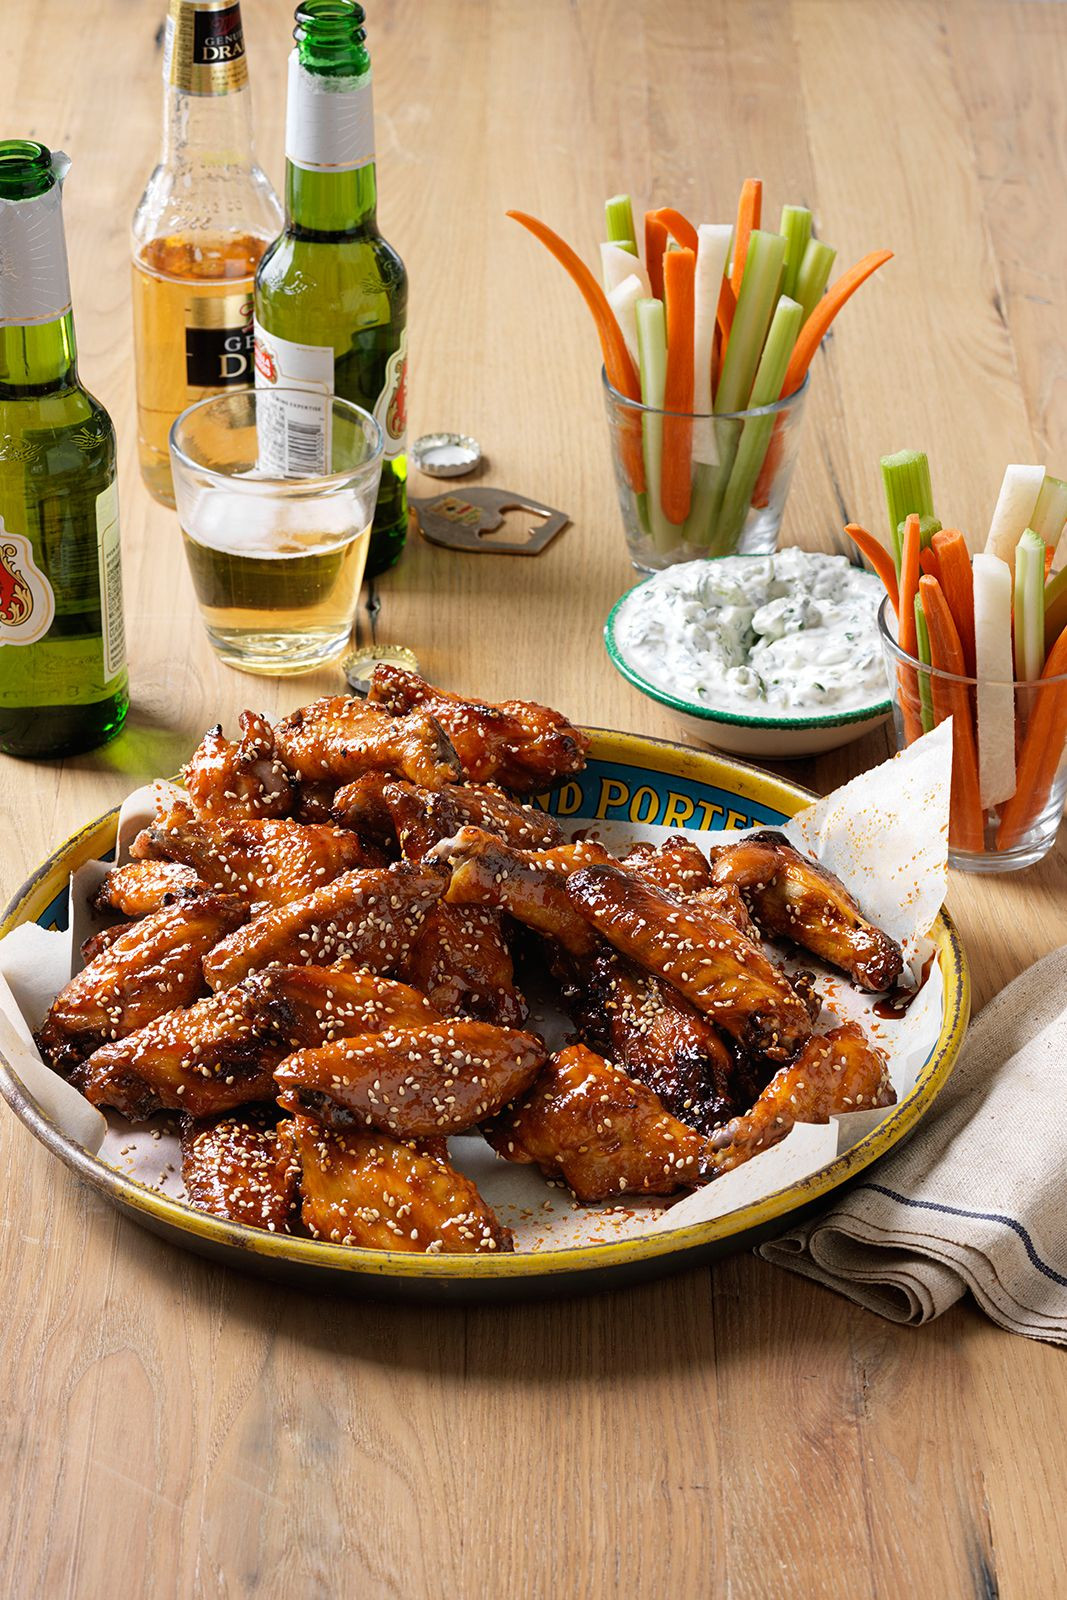 Super Bowl Wing Recipes
 PSA You Can Make Your Super Bowl Chicken Wings in an